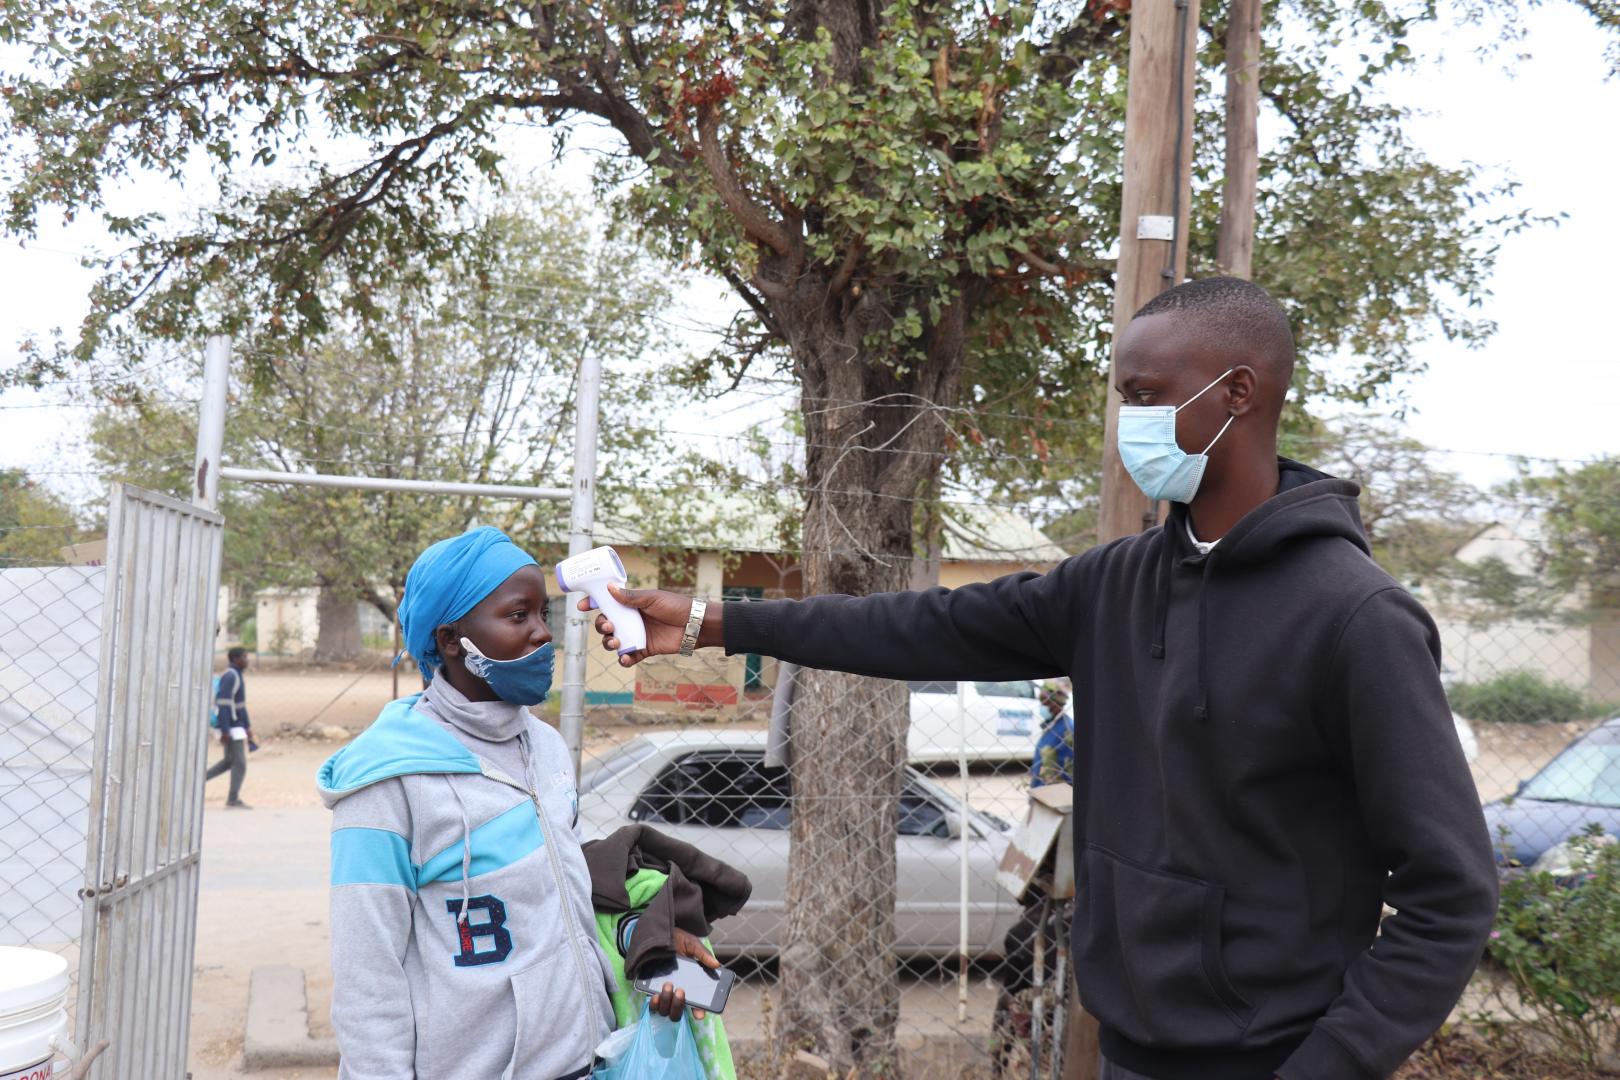 Mmoloki Malemane (right) checking a patient’s temperature before they enter the hospital as part of his Covid-19 pre-screening routine.